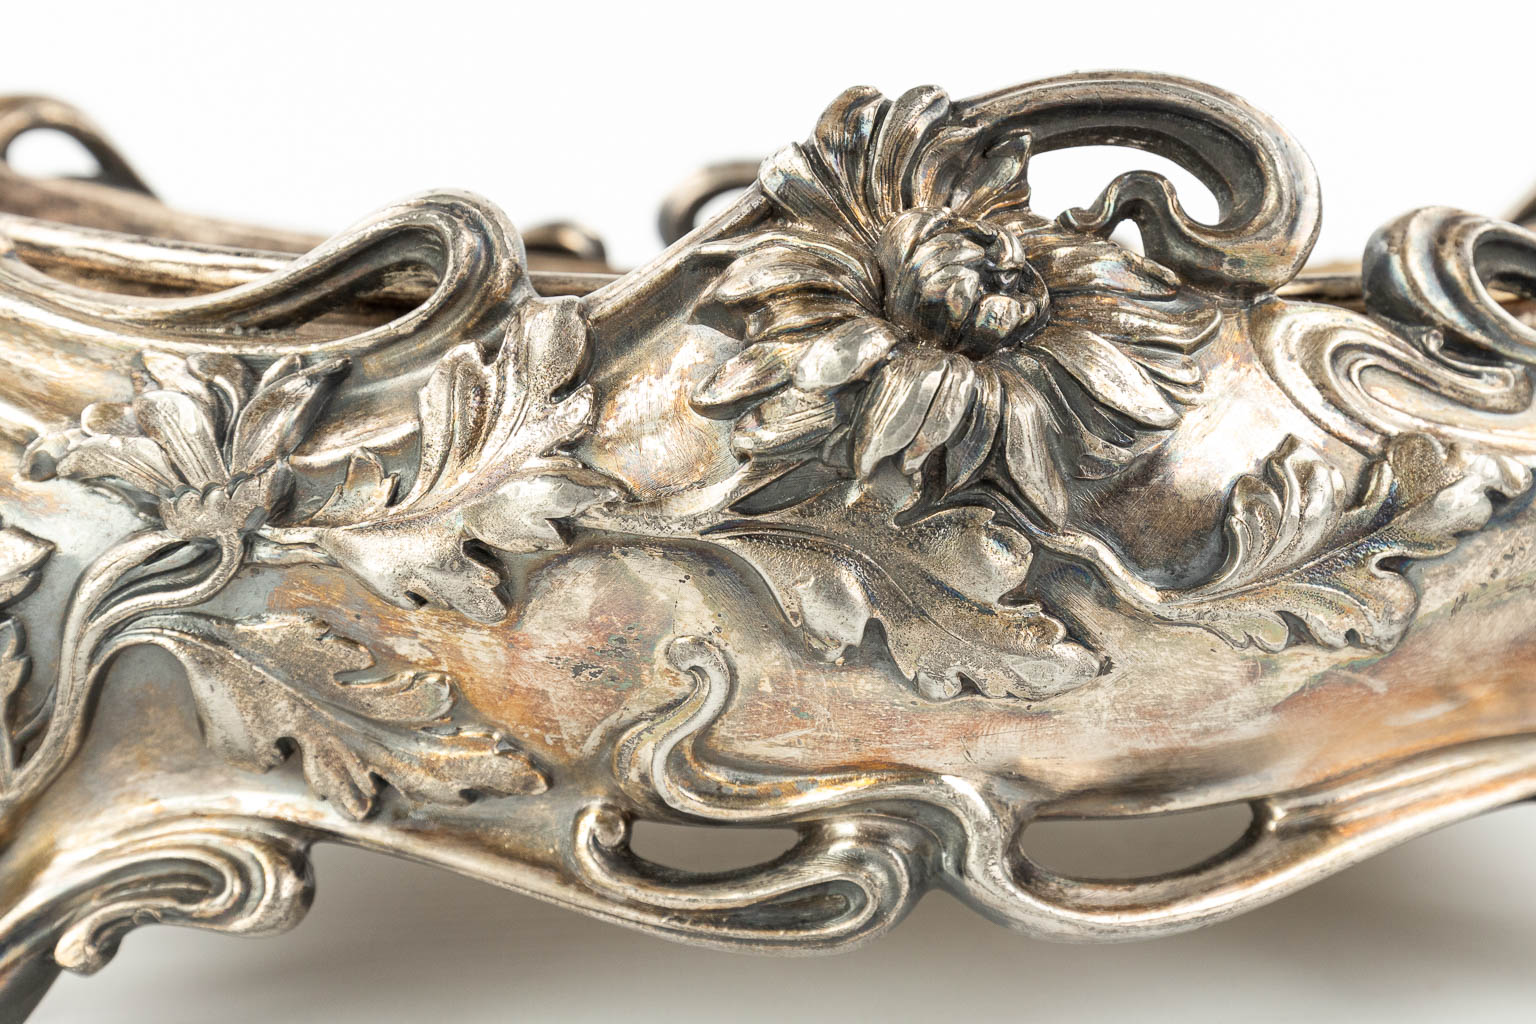 An antique table centrepiece or Jardinière, made in art nouveau style of silver-plated metal. (H:14cm)